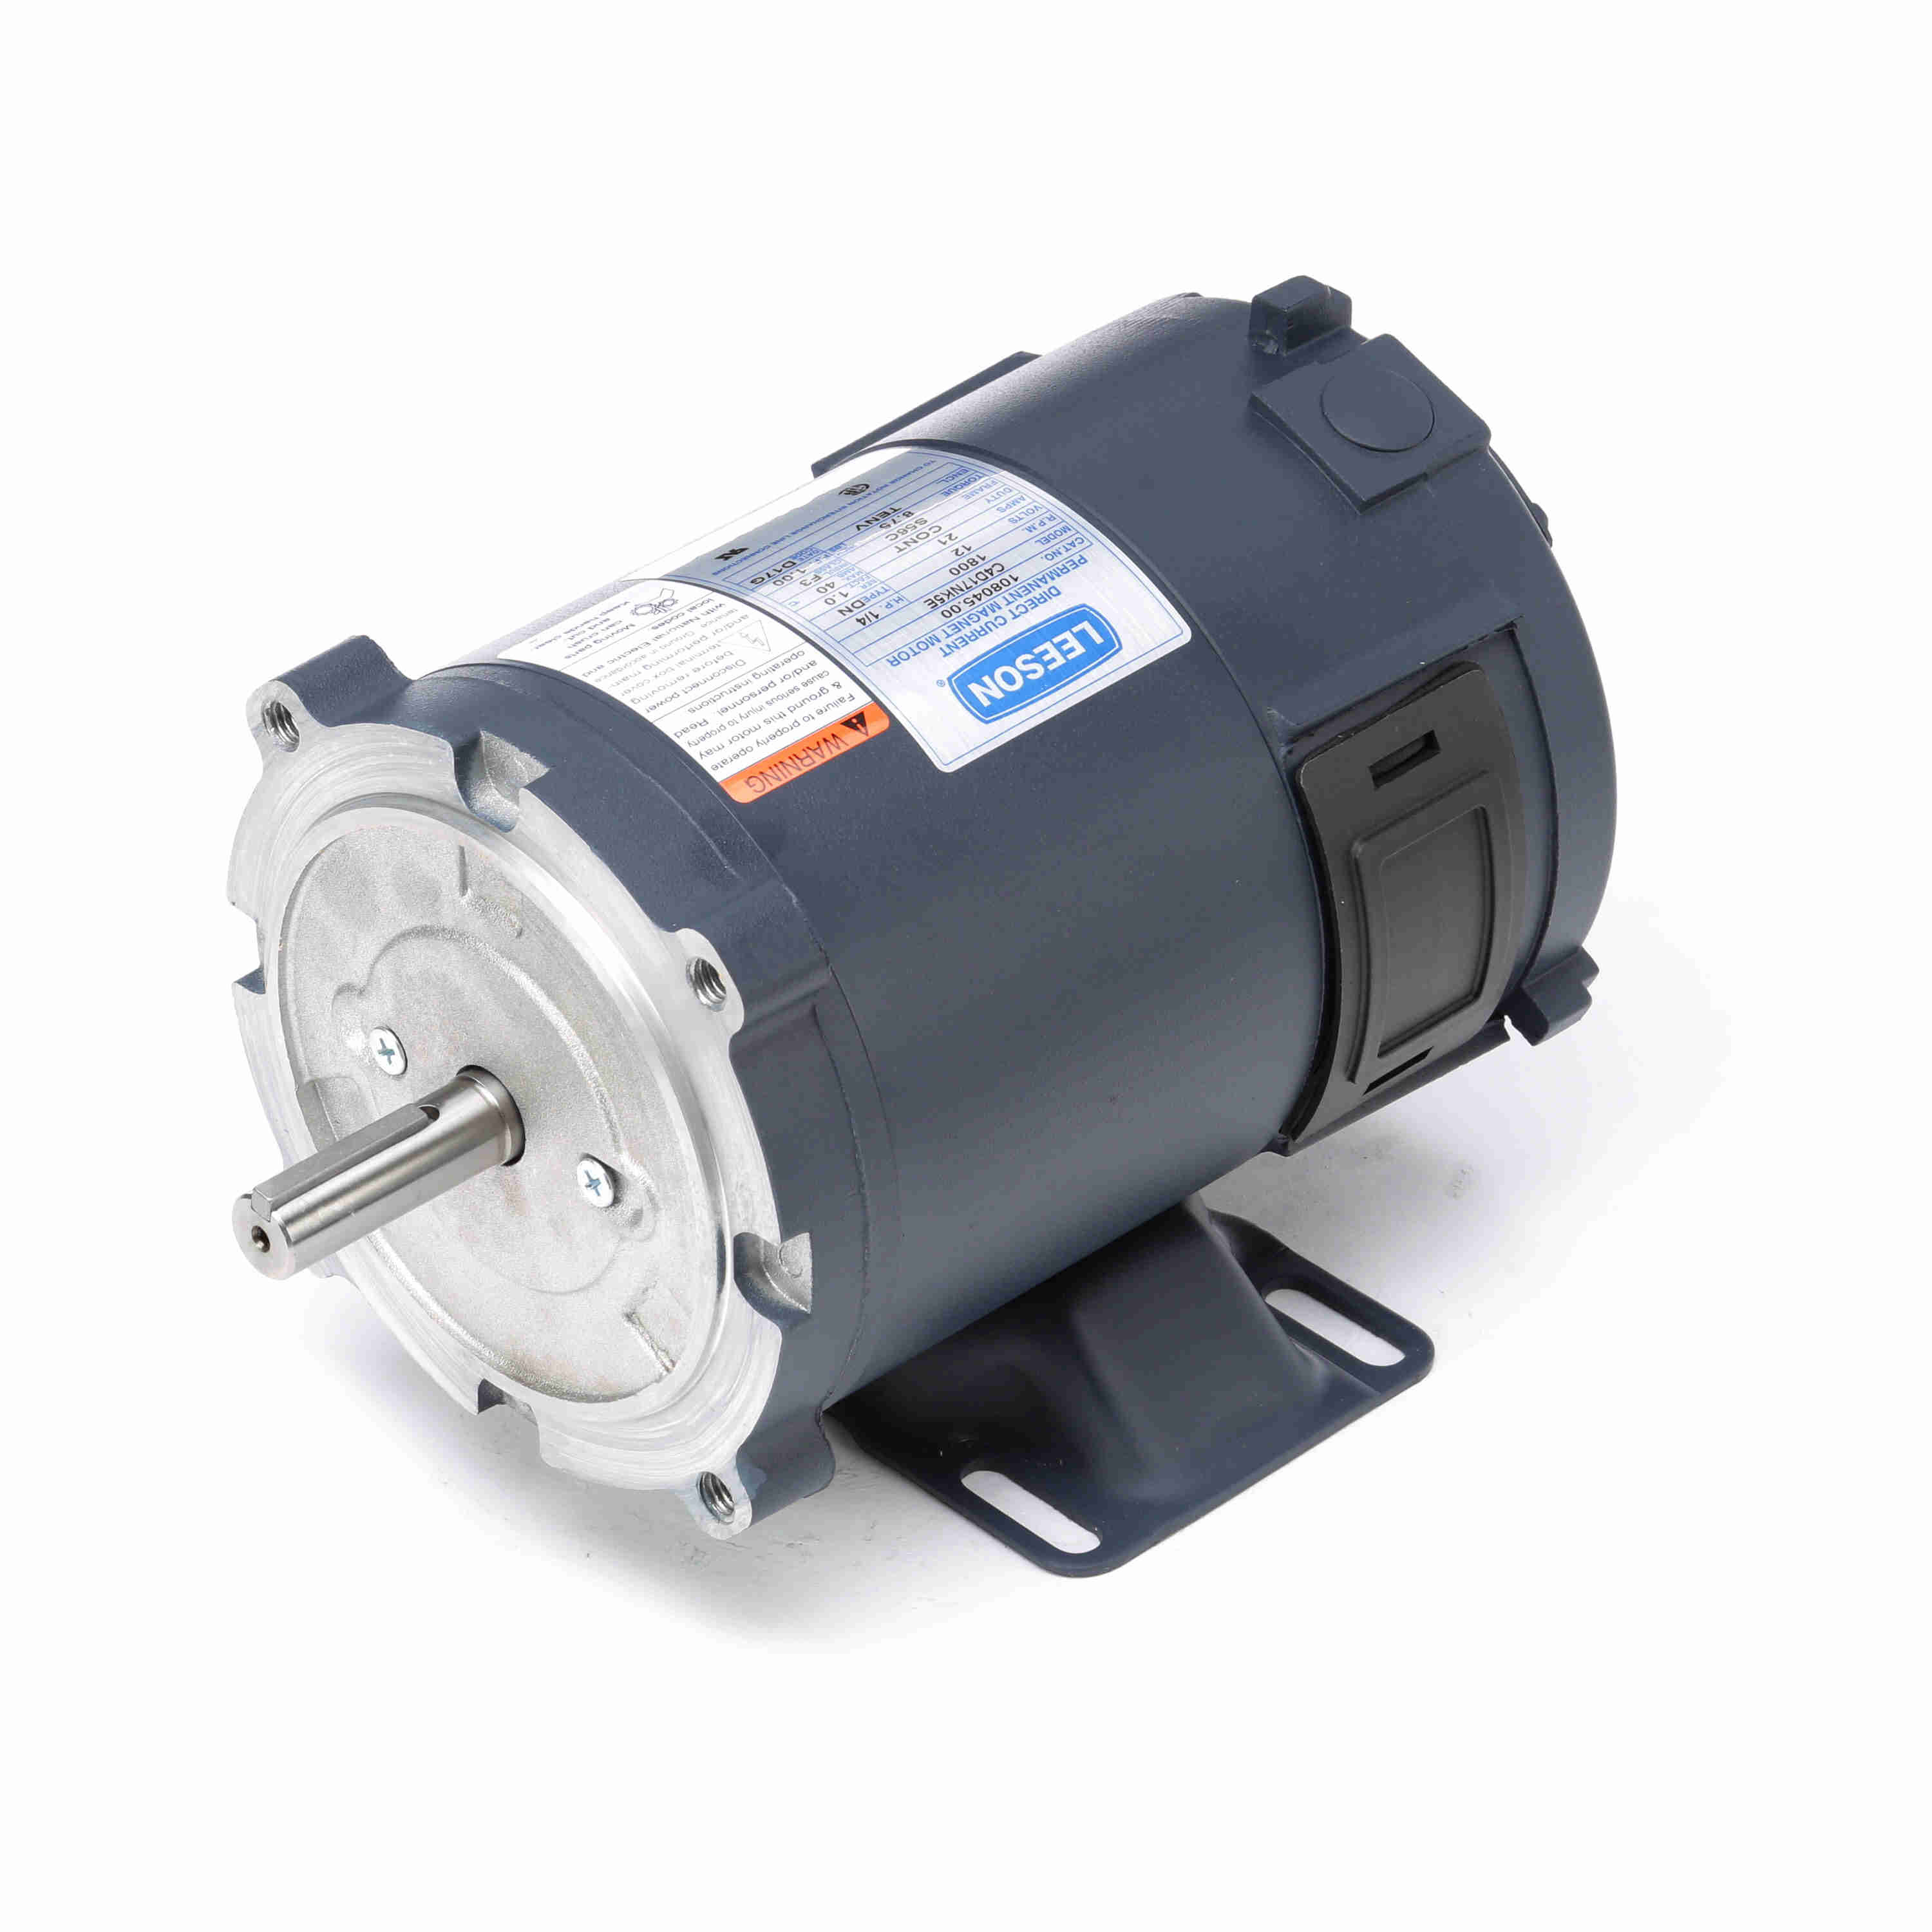 108045.00 Leeson 0.25HP Low Voltage DC Electric Motor, 1800RPM 2